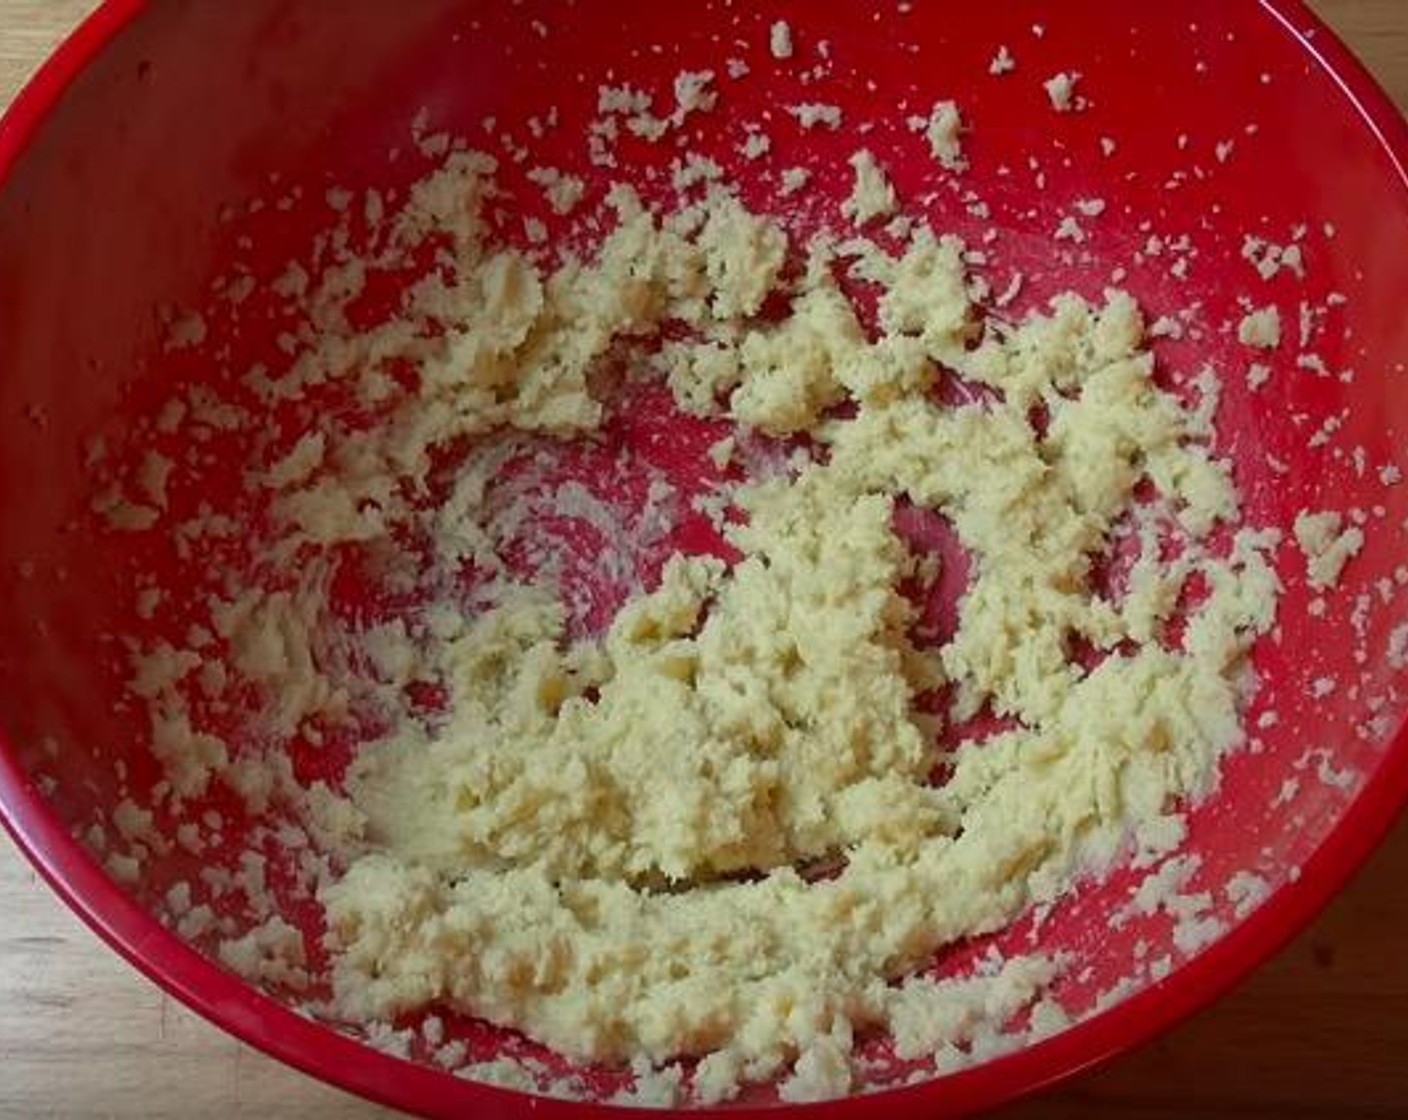 step 1 In a mixing bowl, add Unsalted Butter (2/3 cup), Caster Sugar (3/4 cup) and Vanilla Extract (1 tsp). Beat with an electric mixer until combined.